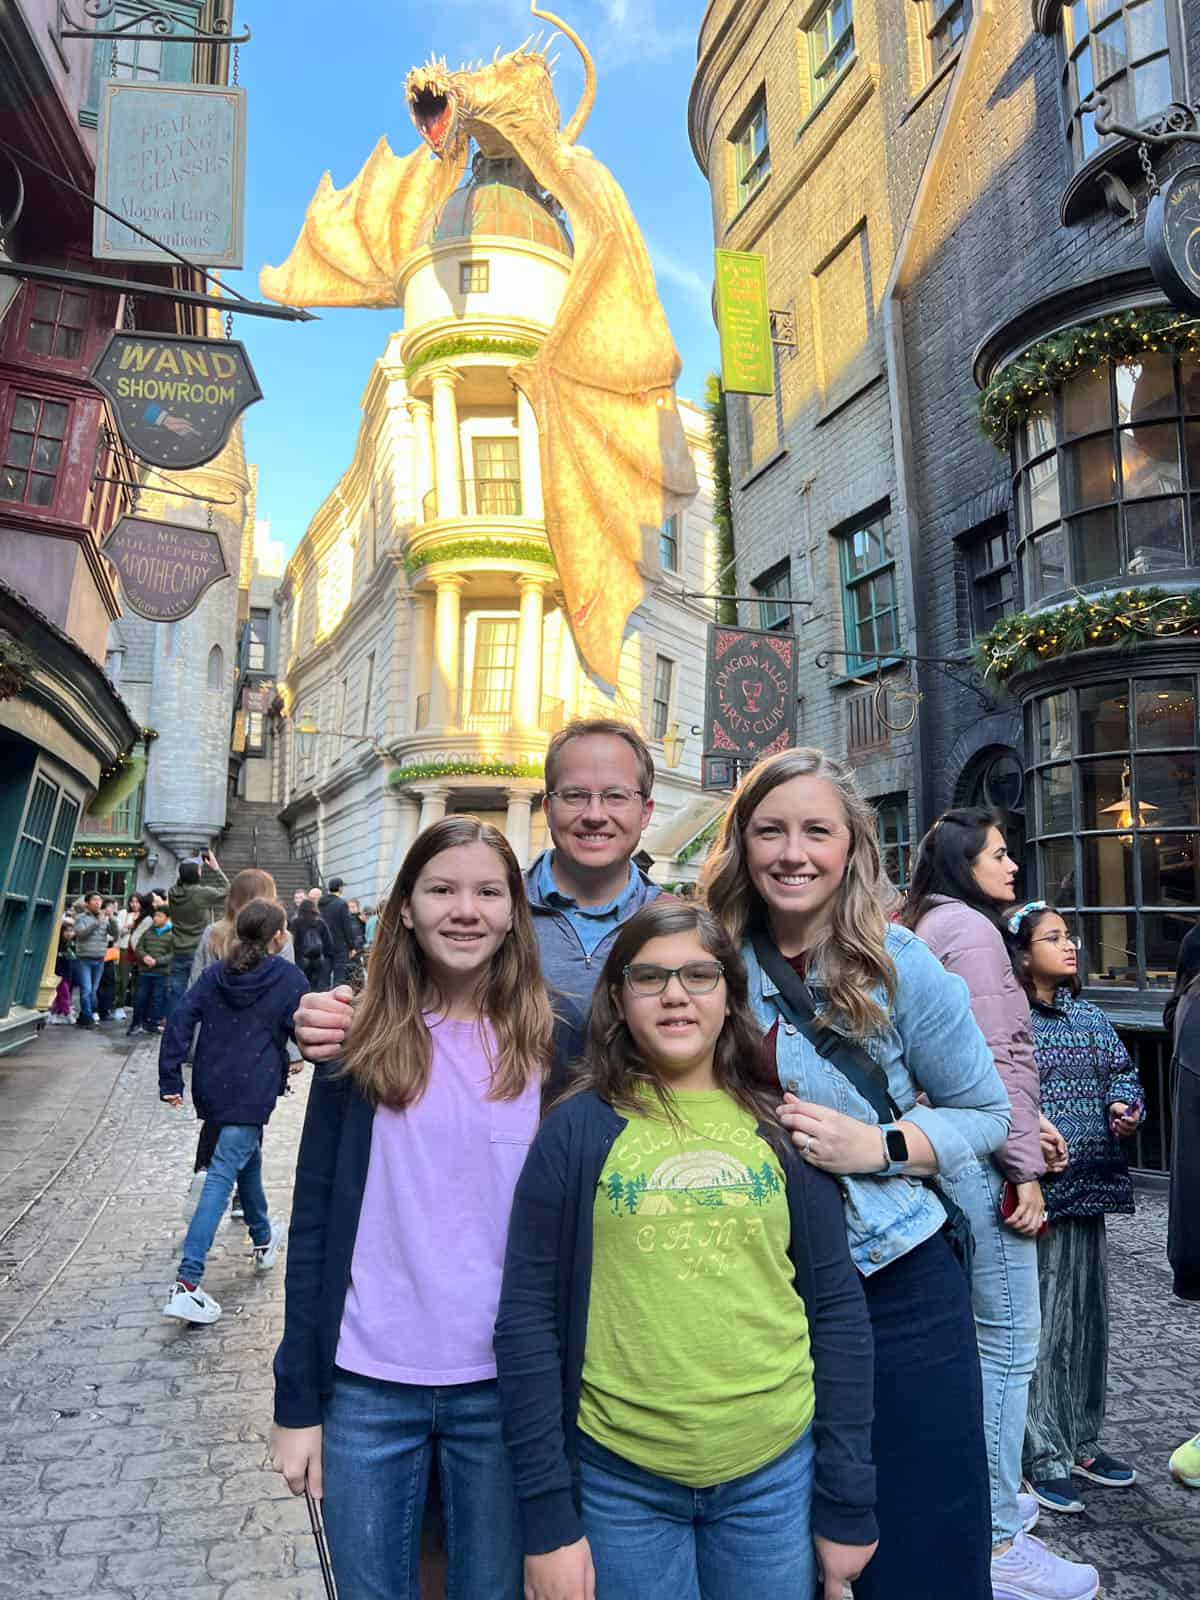 A family of four at the Wizarding World of Harry Potter in Universal Studios, Orlando.